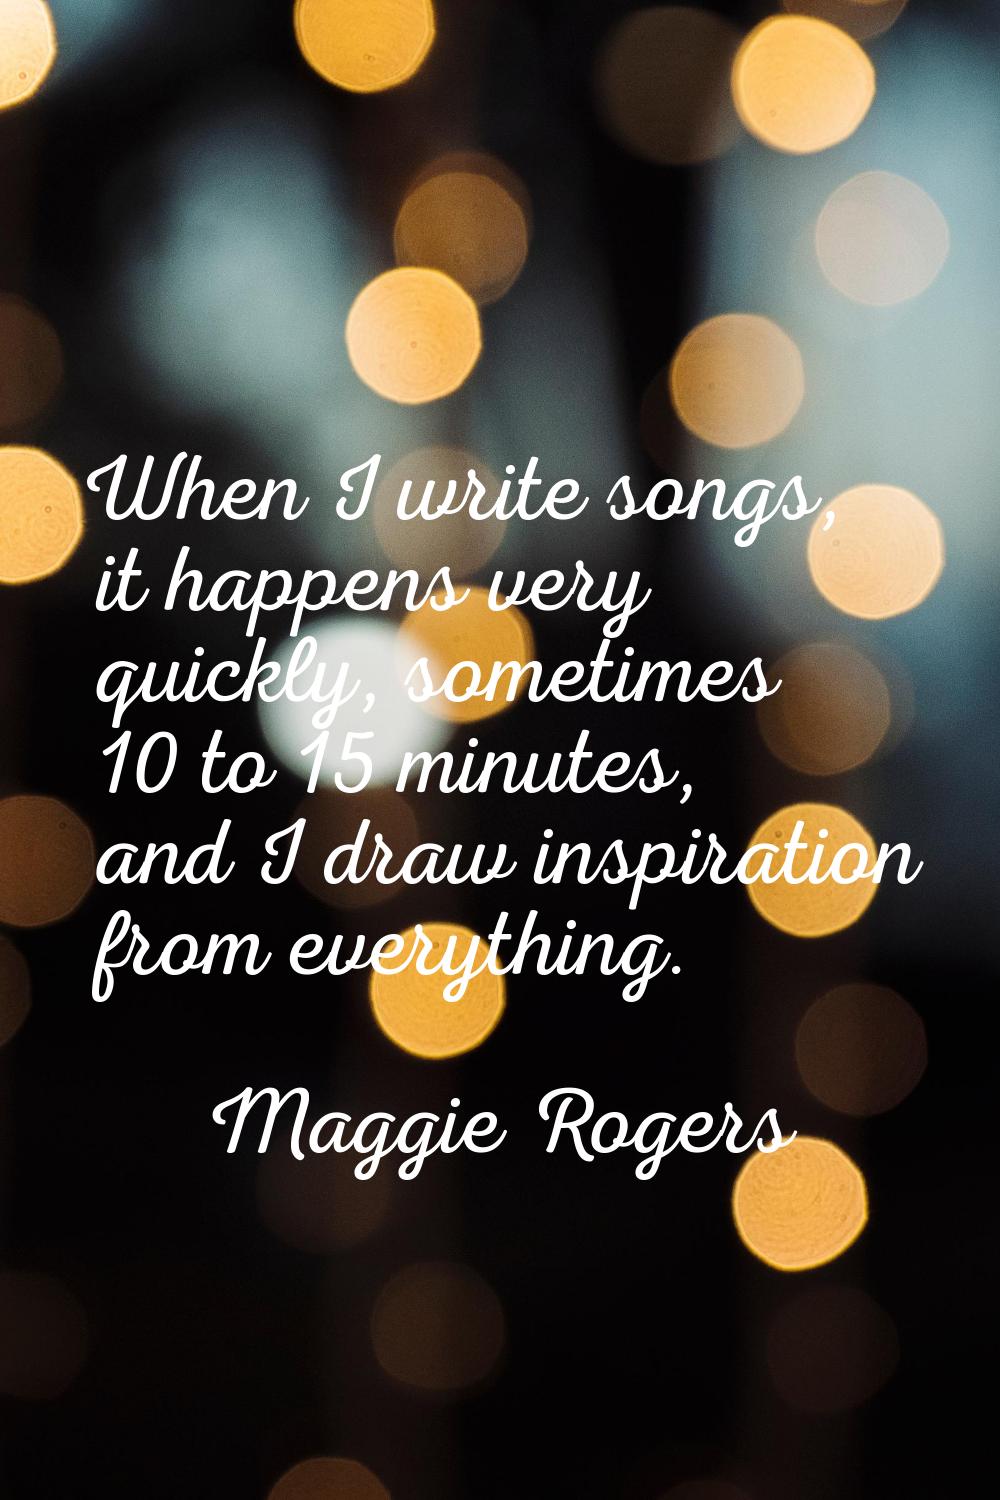 When I write songs, it happens very quickly, sometimes 10 to 15 minutes, and I draw inspiration fro